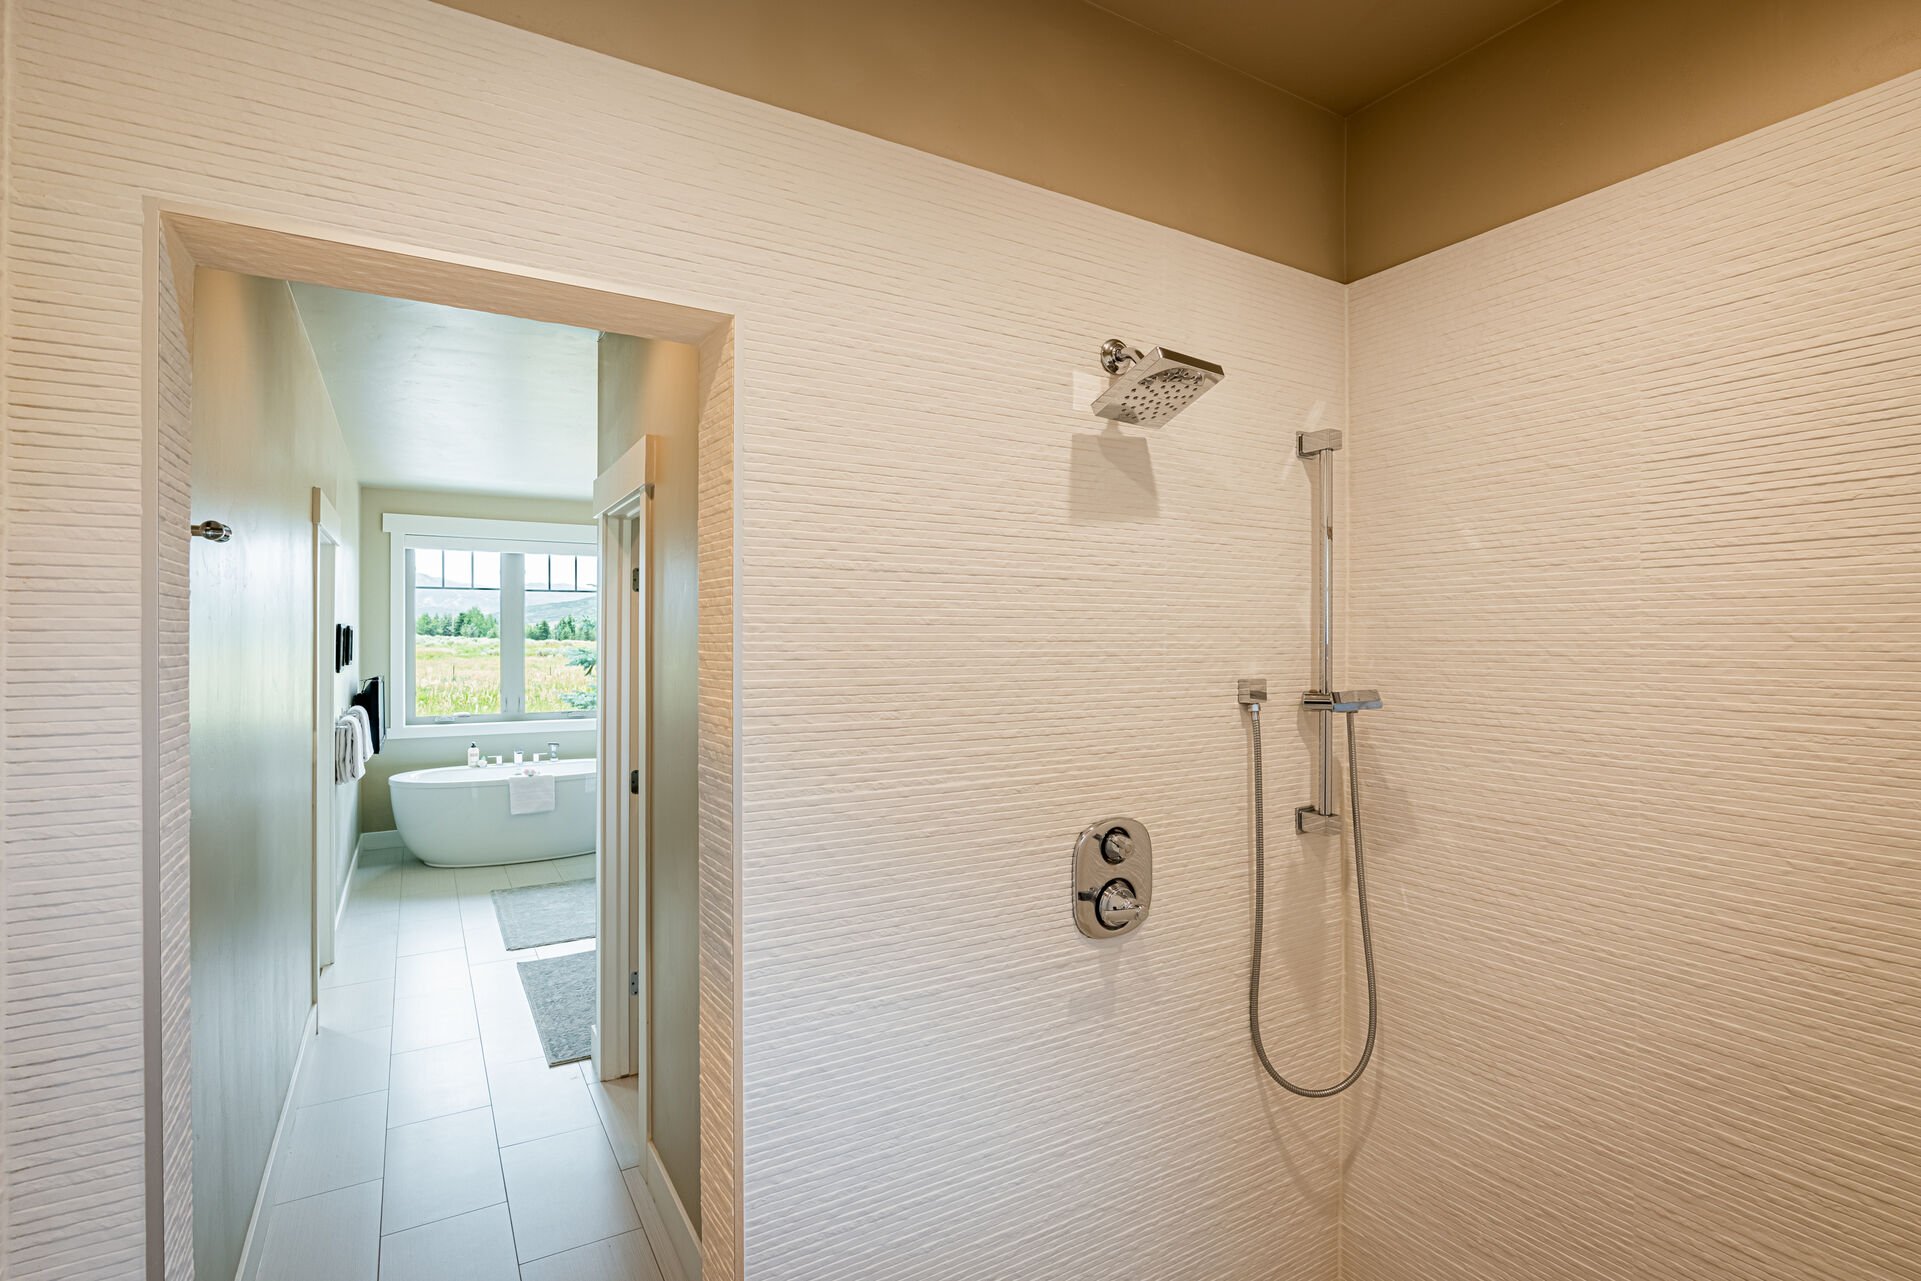 Large spacious walk-in shower with two shower heads